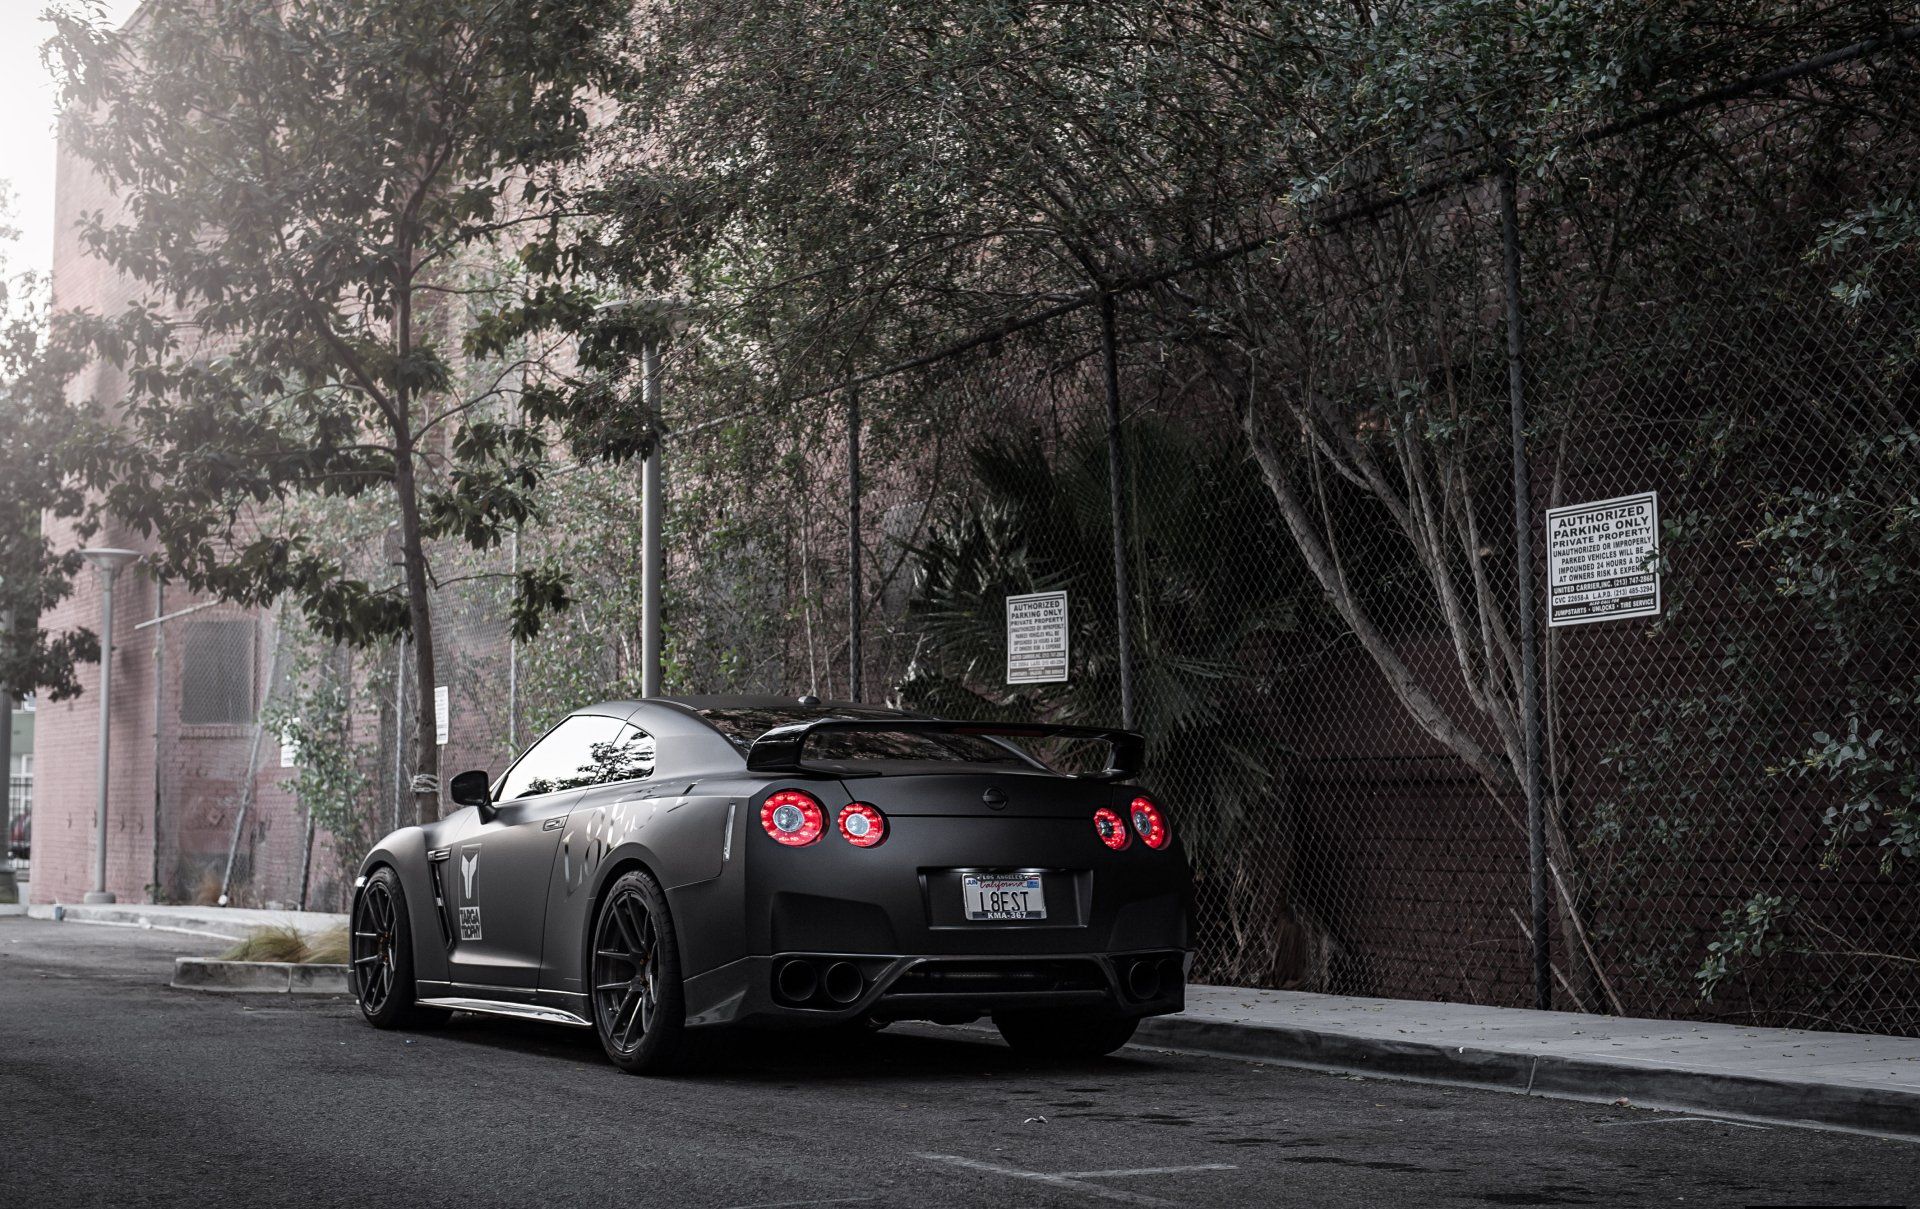 4K Ultra HD Nissan GT R Wallpaper And Background Image